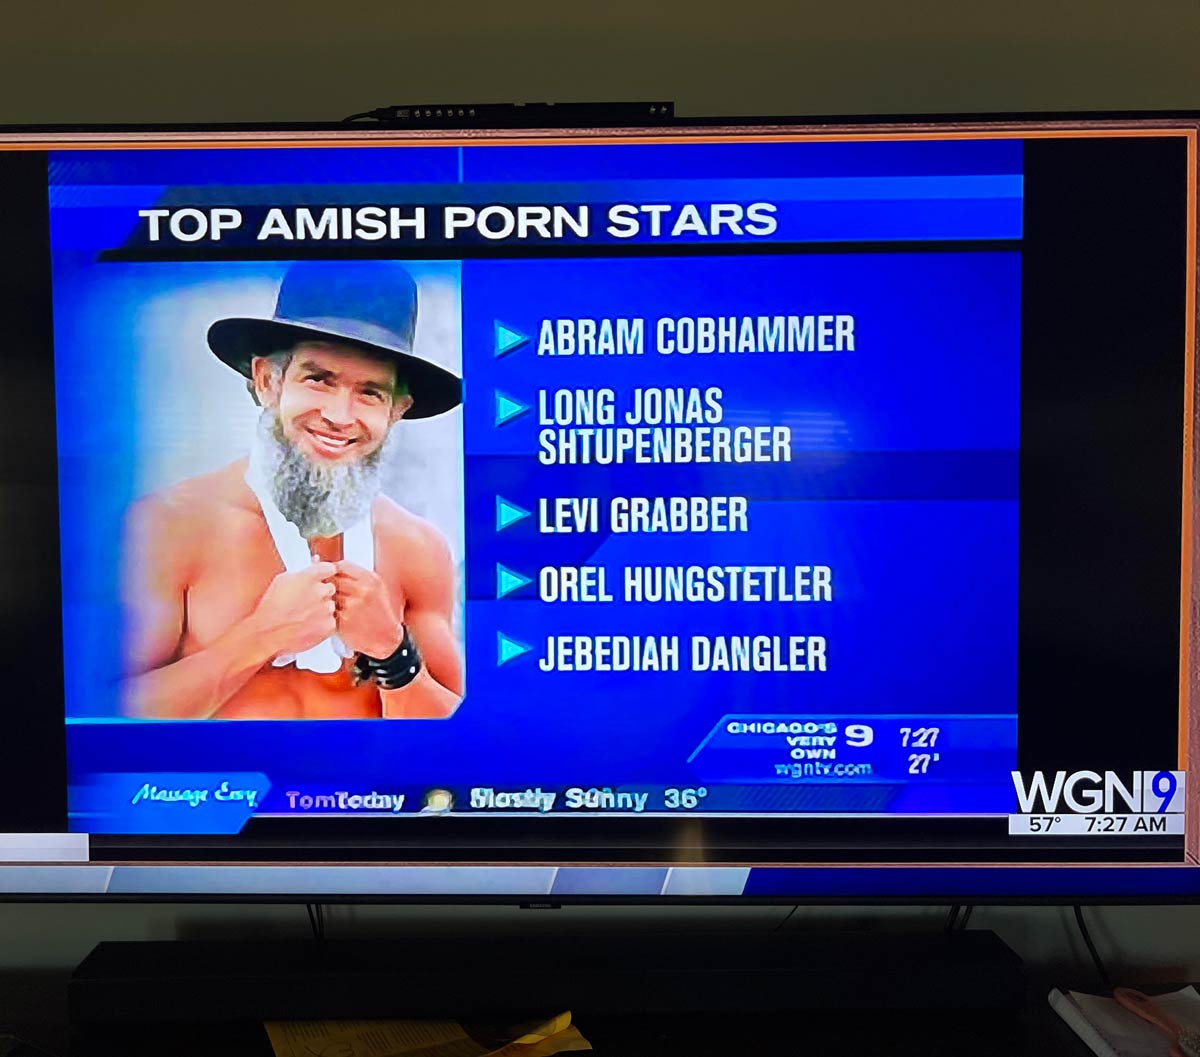 Top Amish Porn Stars on the local news this morning